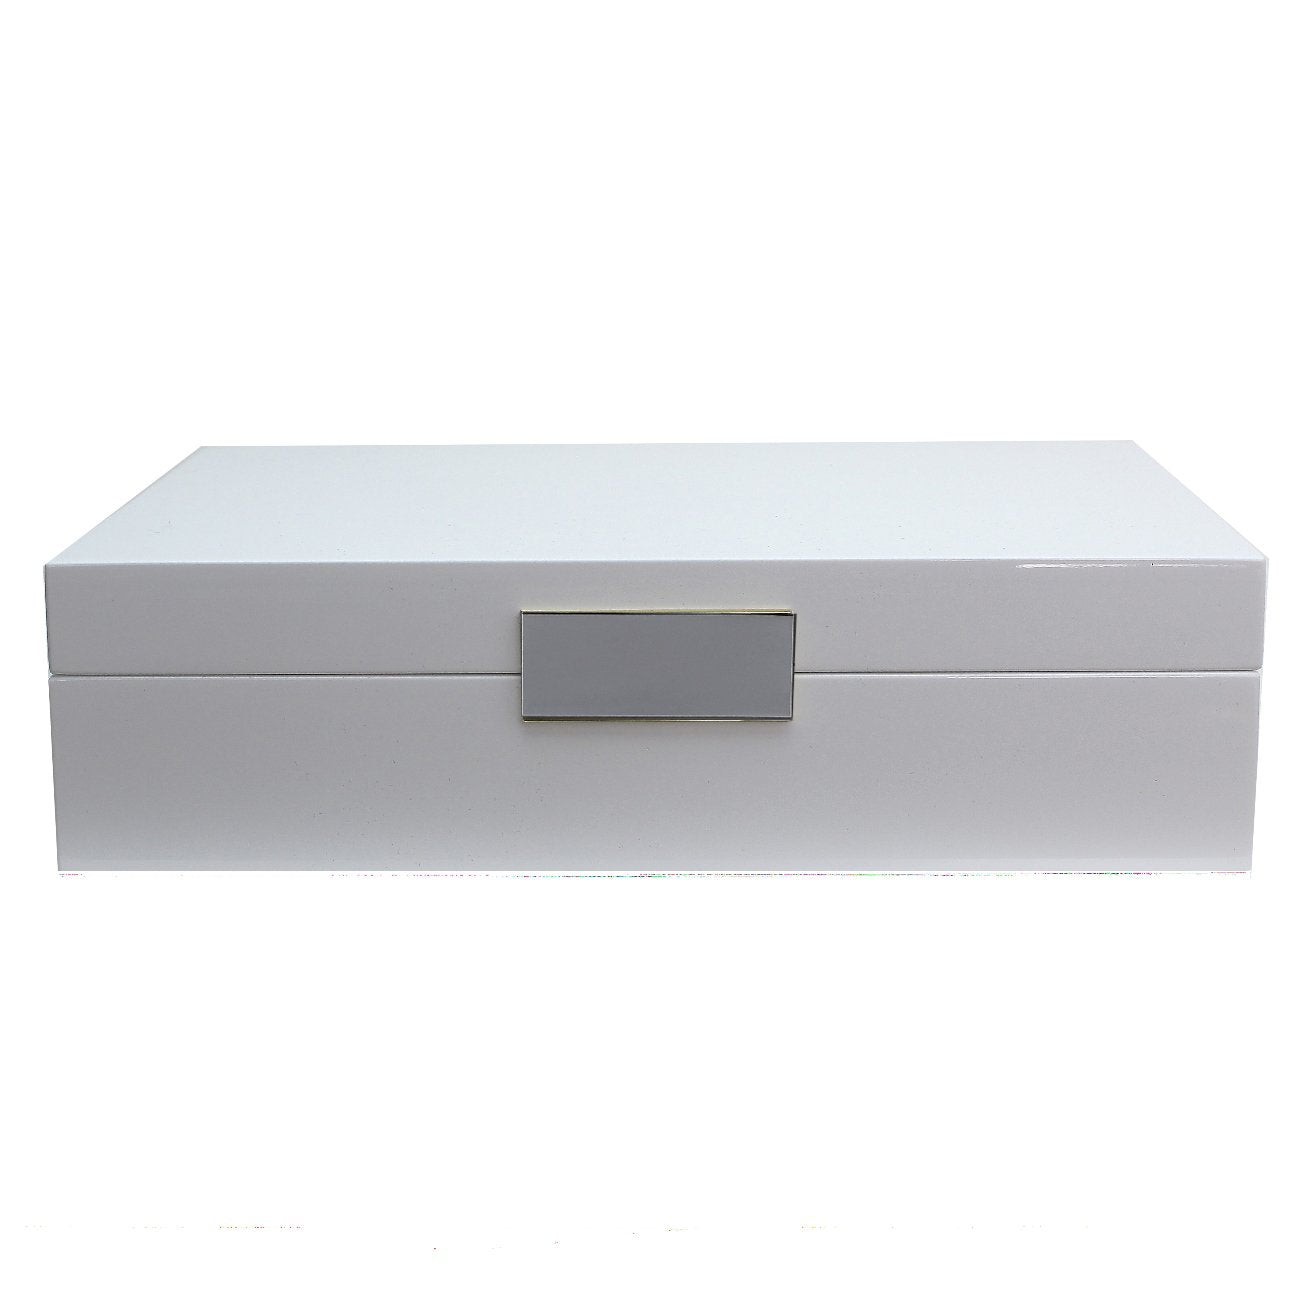 Large white watch box with silver plated clasp